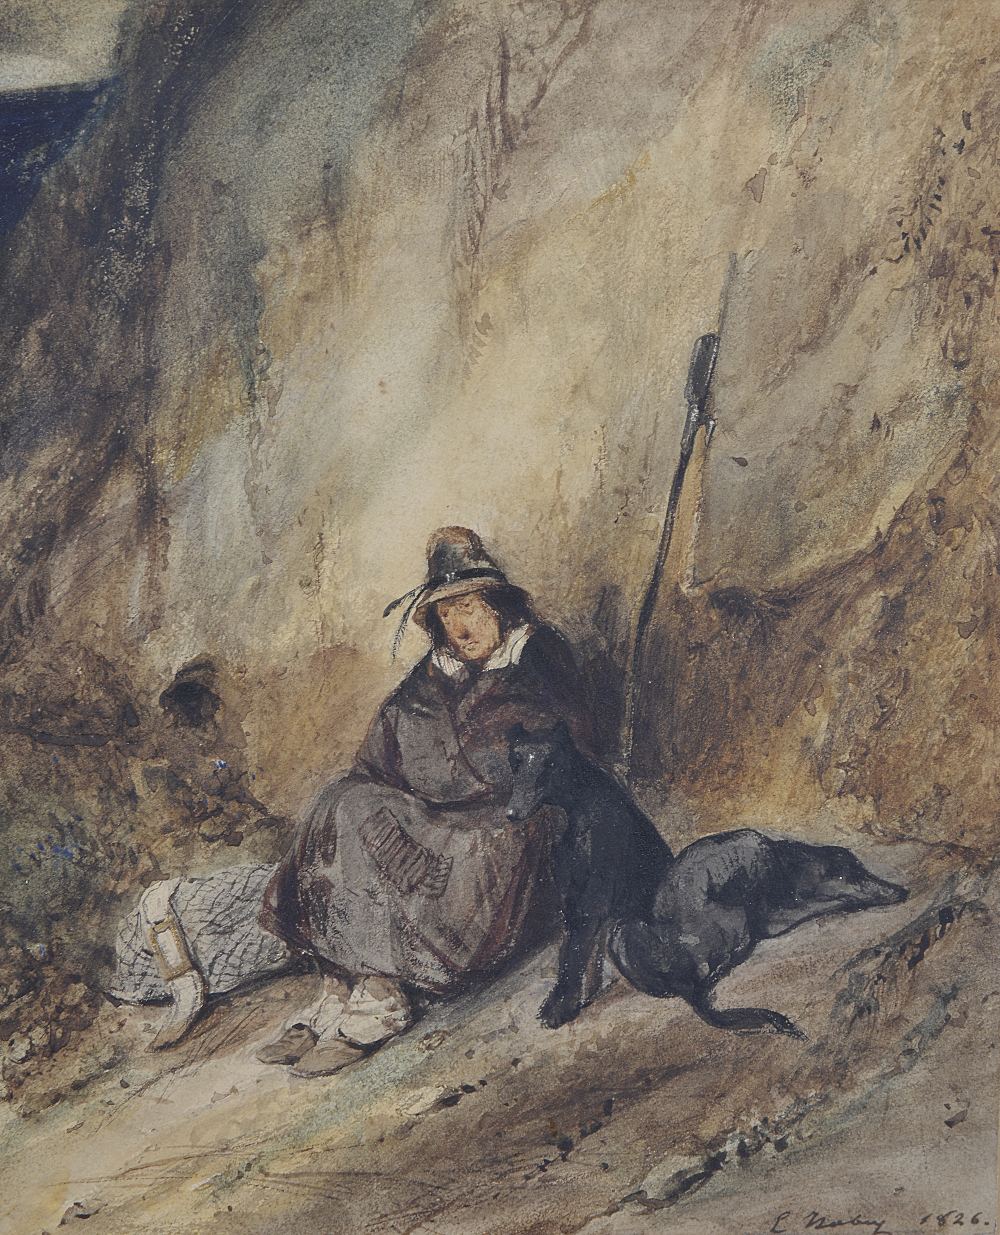 LOUIS-GABRIEL ISABEY (FRENCH, 1803-1886) THE WEARY TRAVELLER signed and dated 1826 l.r;